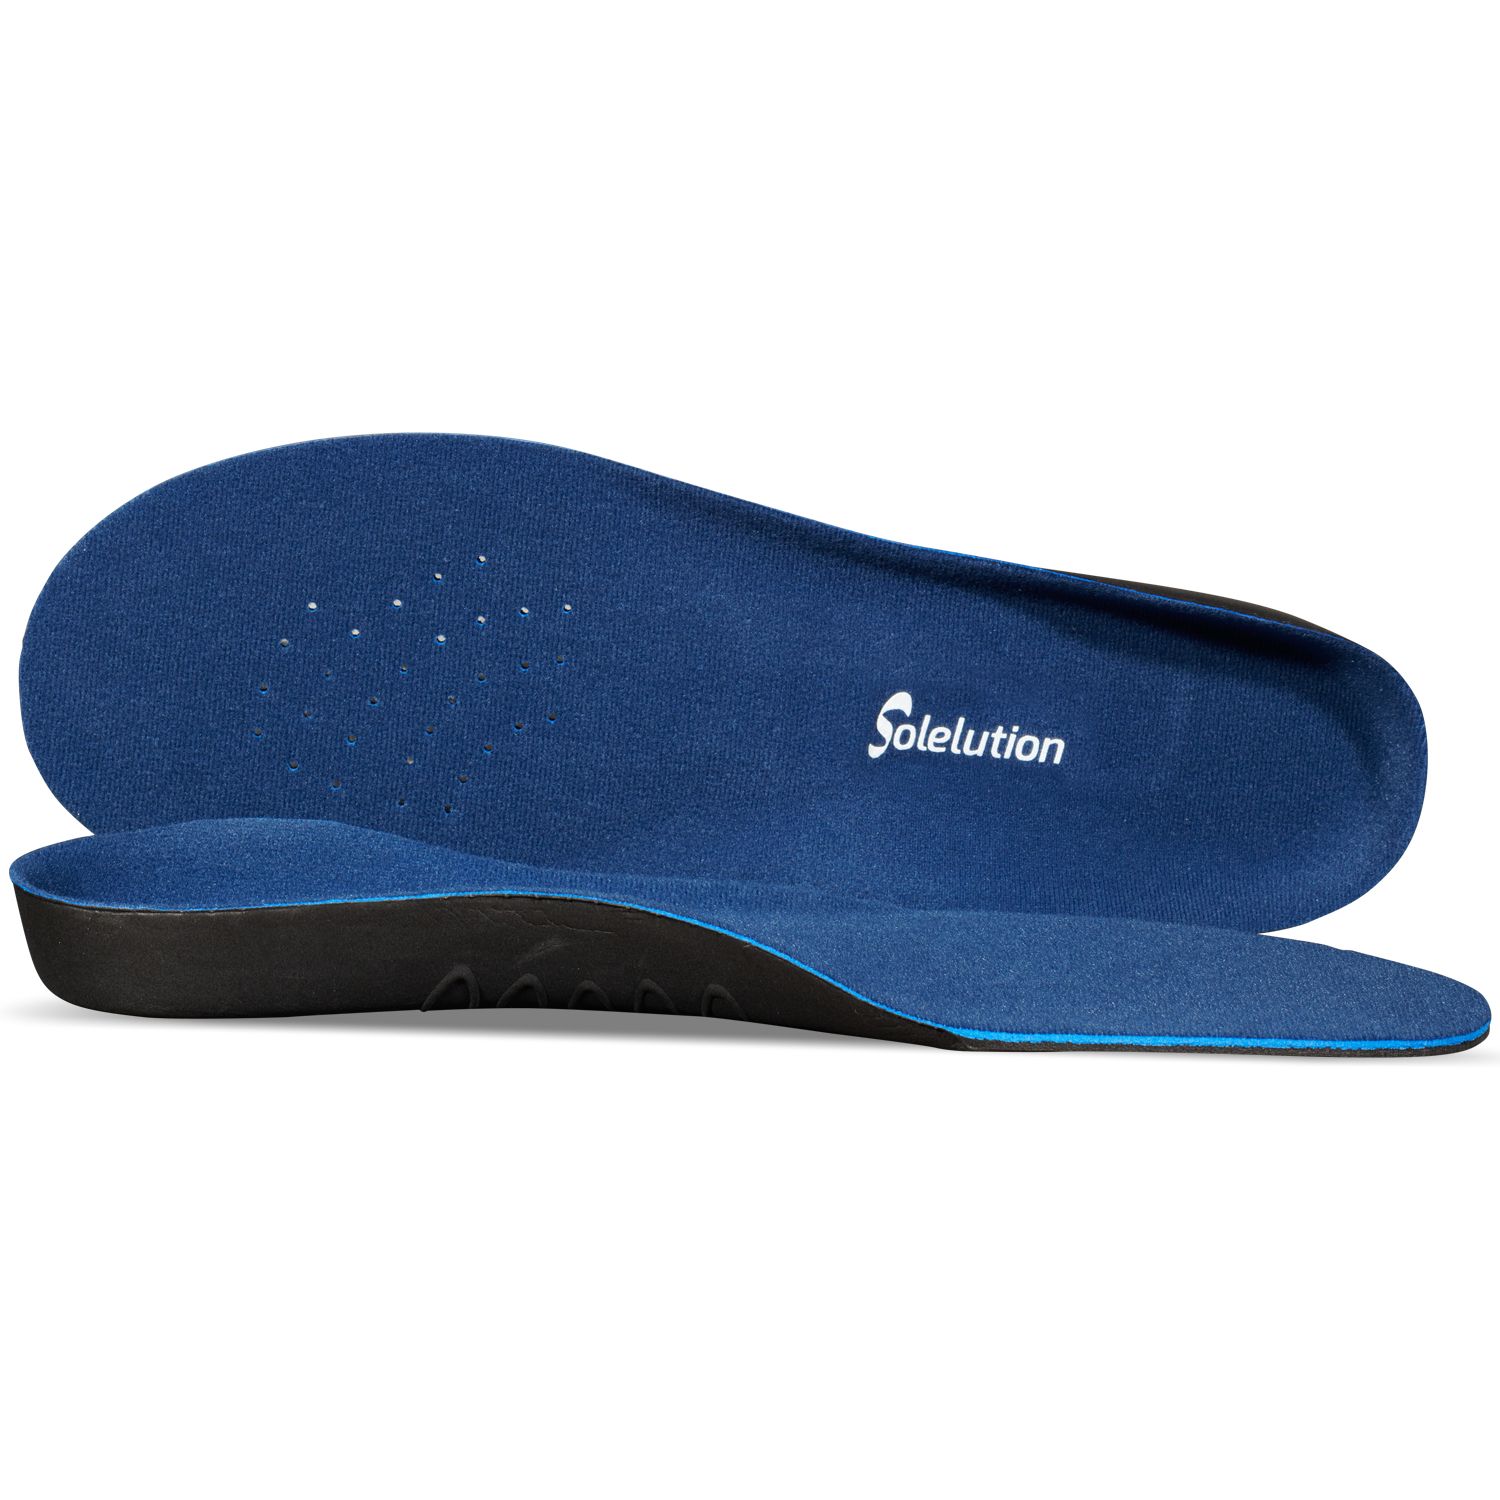 solelution flatfoot insoles for sale